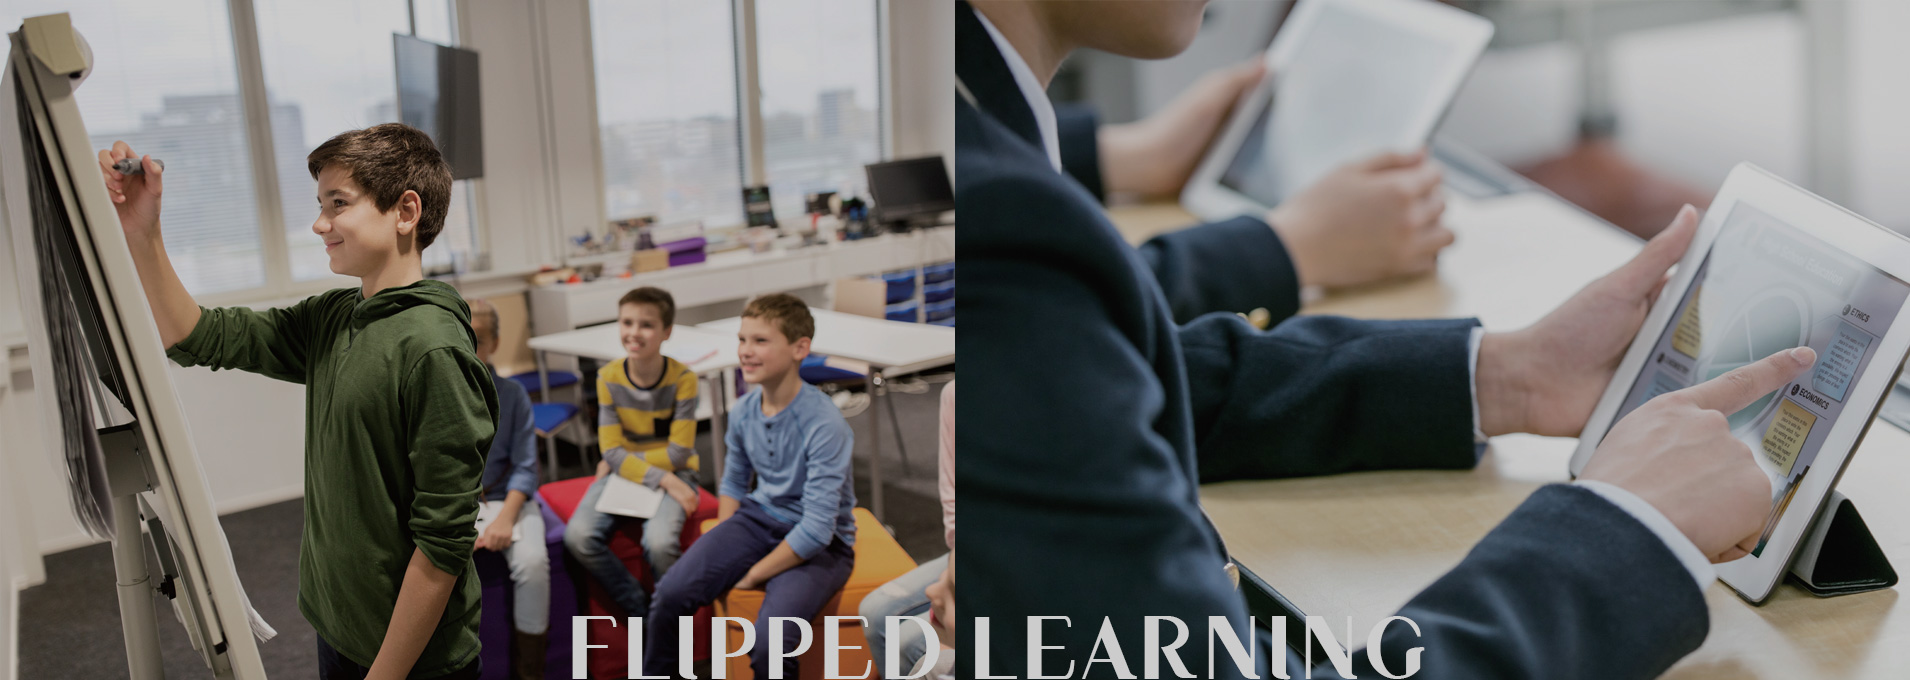 FLIPPED LEARNING